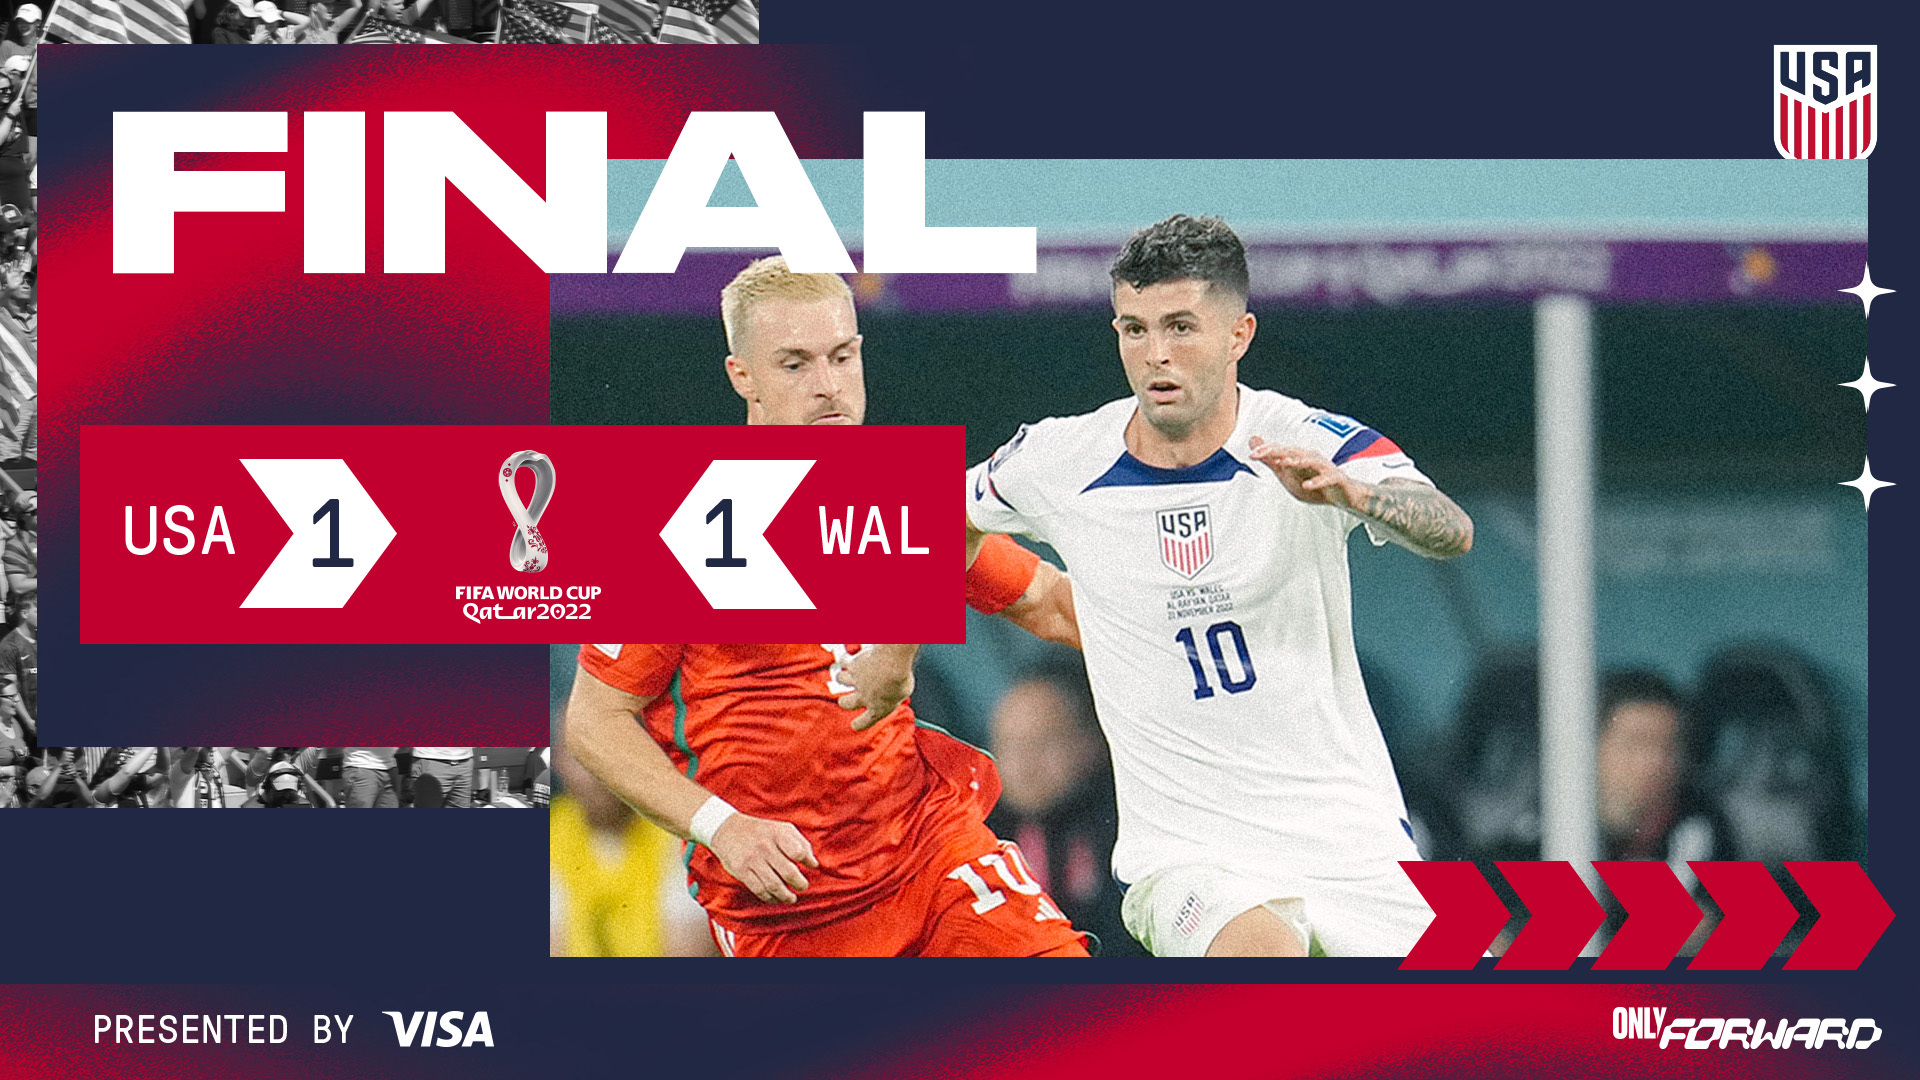 Iran 0-1 USA summary: USMNT in last 16, scores, stats and game recap